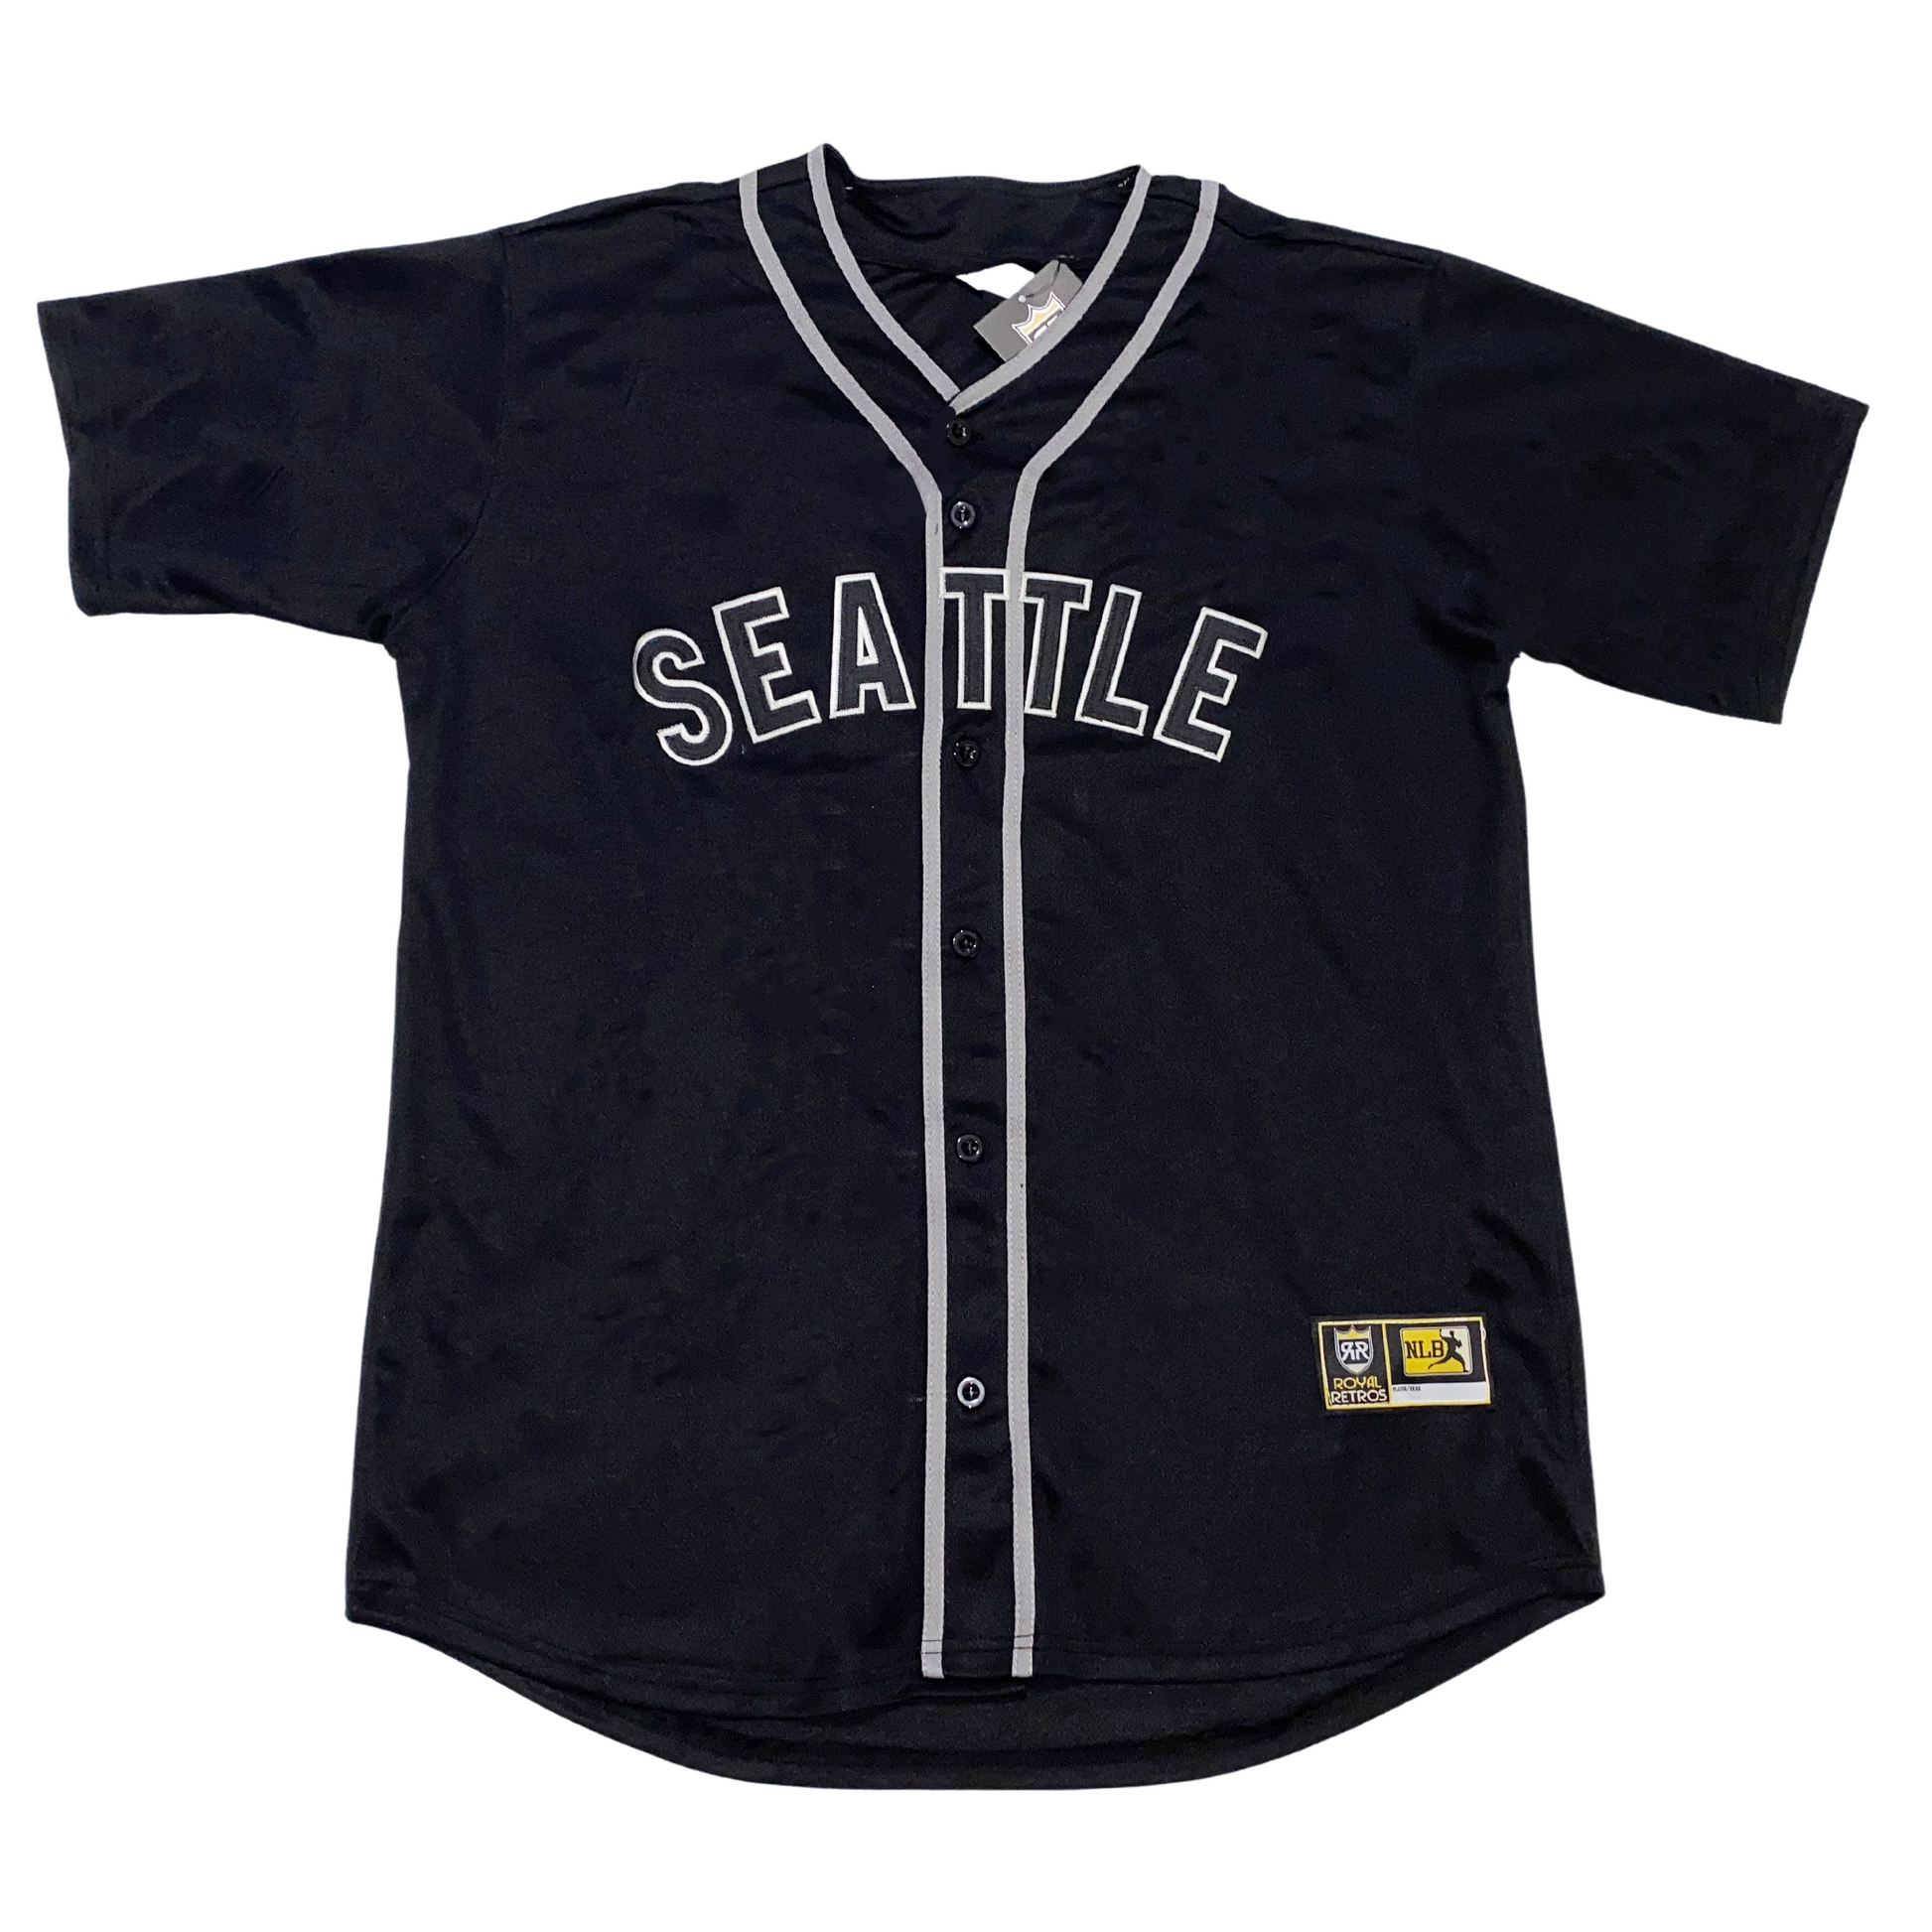 Vintage / Retro Russell Athletic Seattle Mariners Jersey XL 